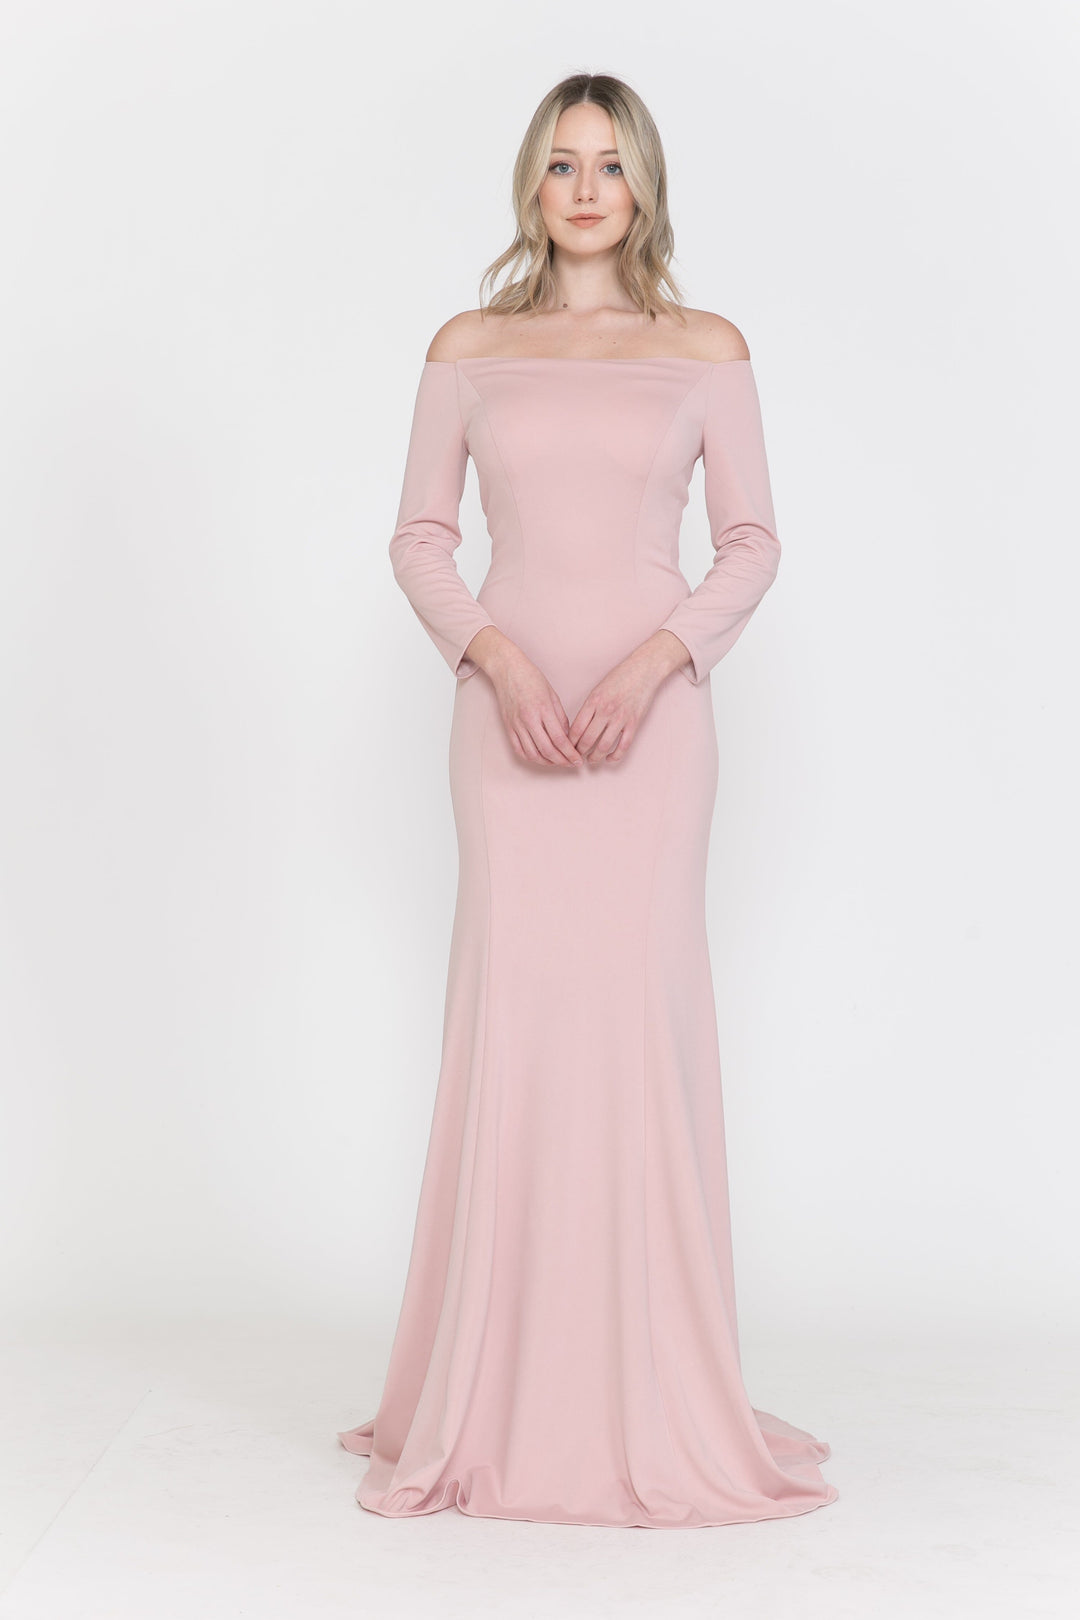 Off the Shoulder Gown with Long Sleeves by Poly USA 8378